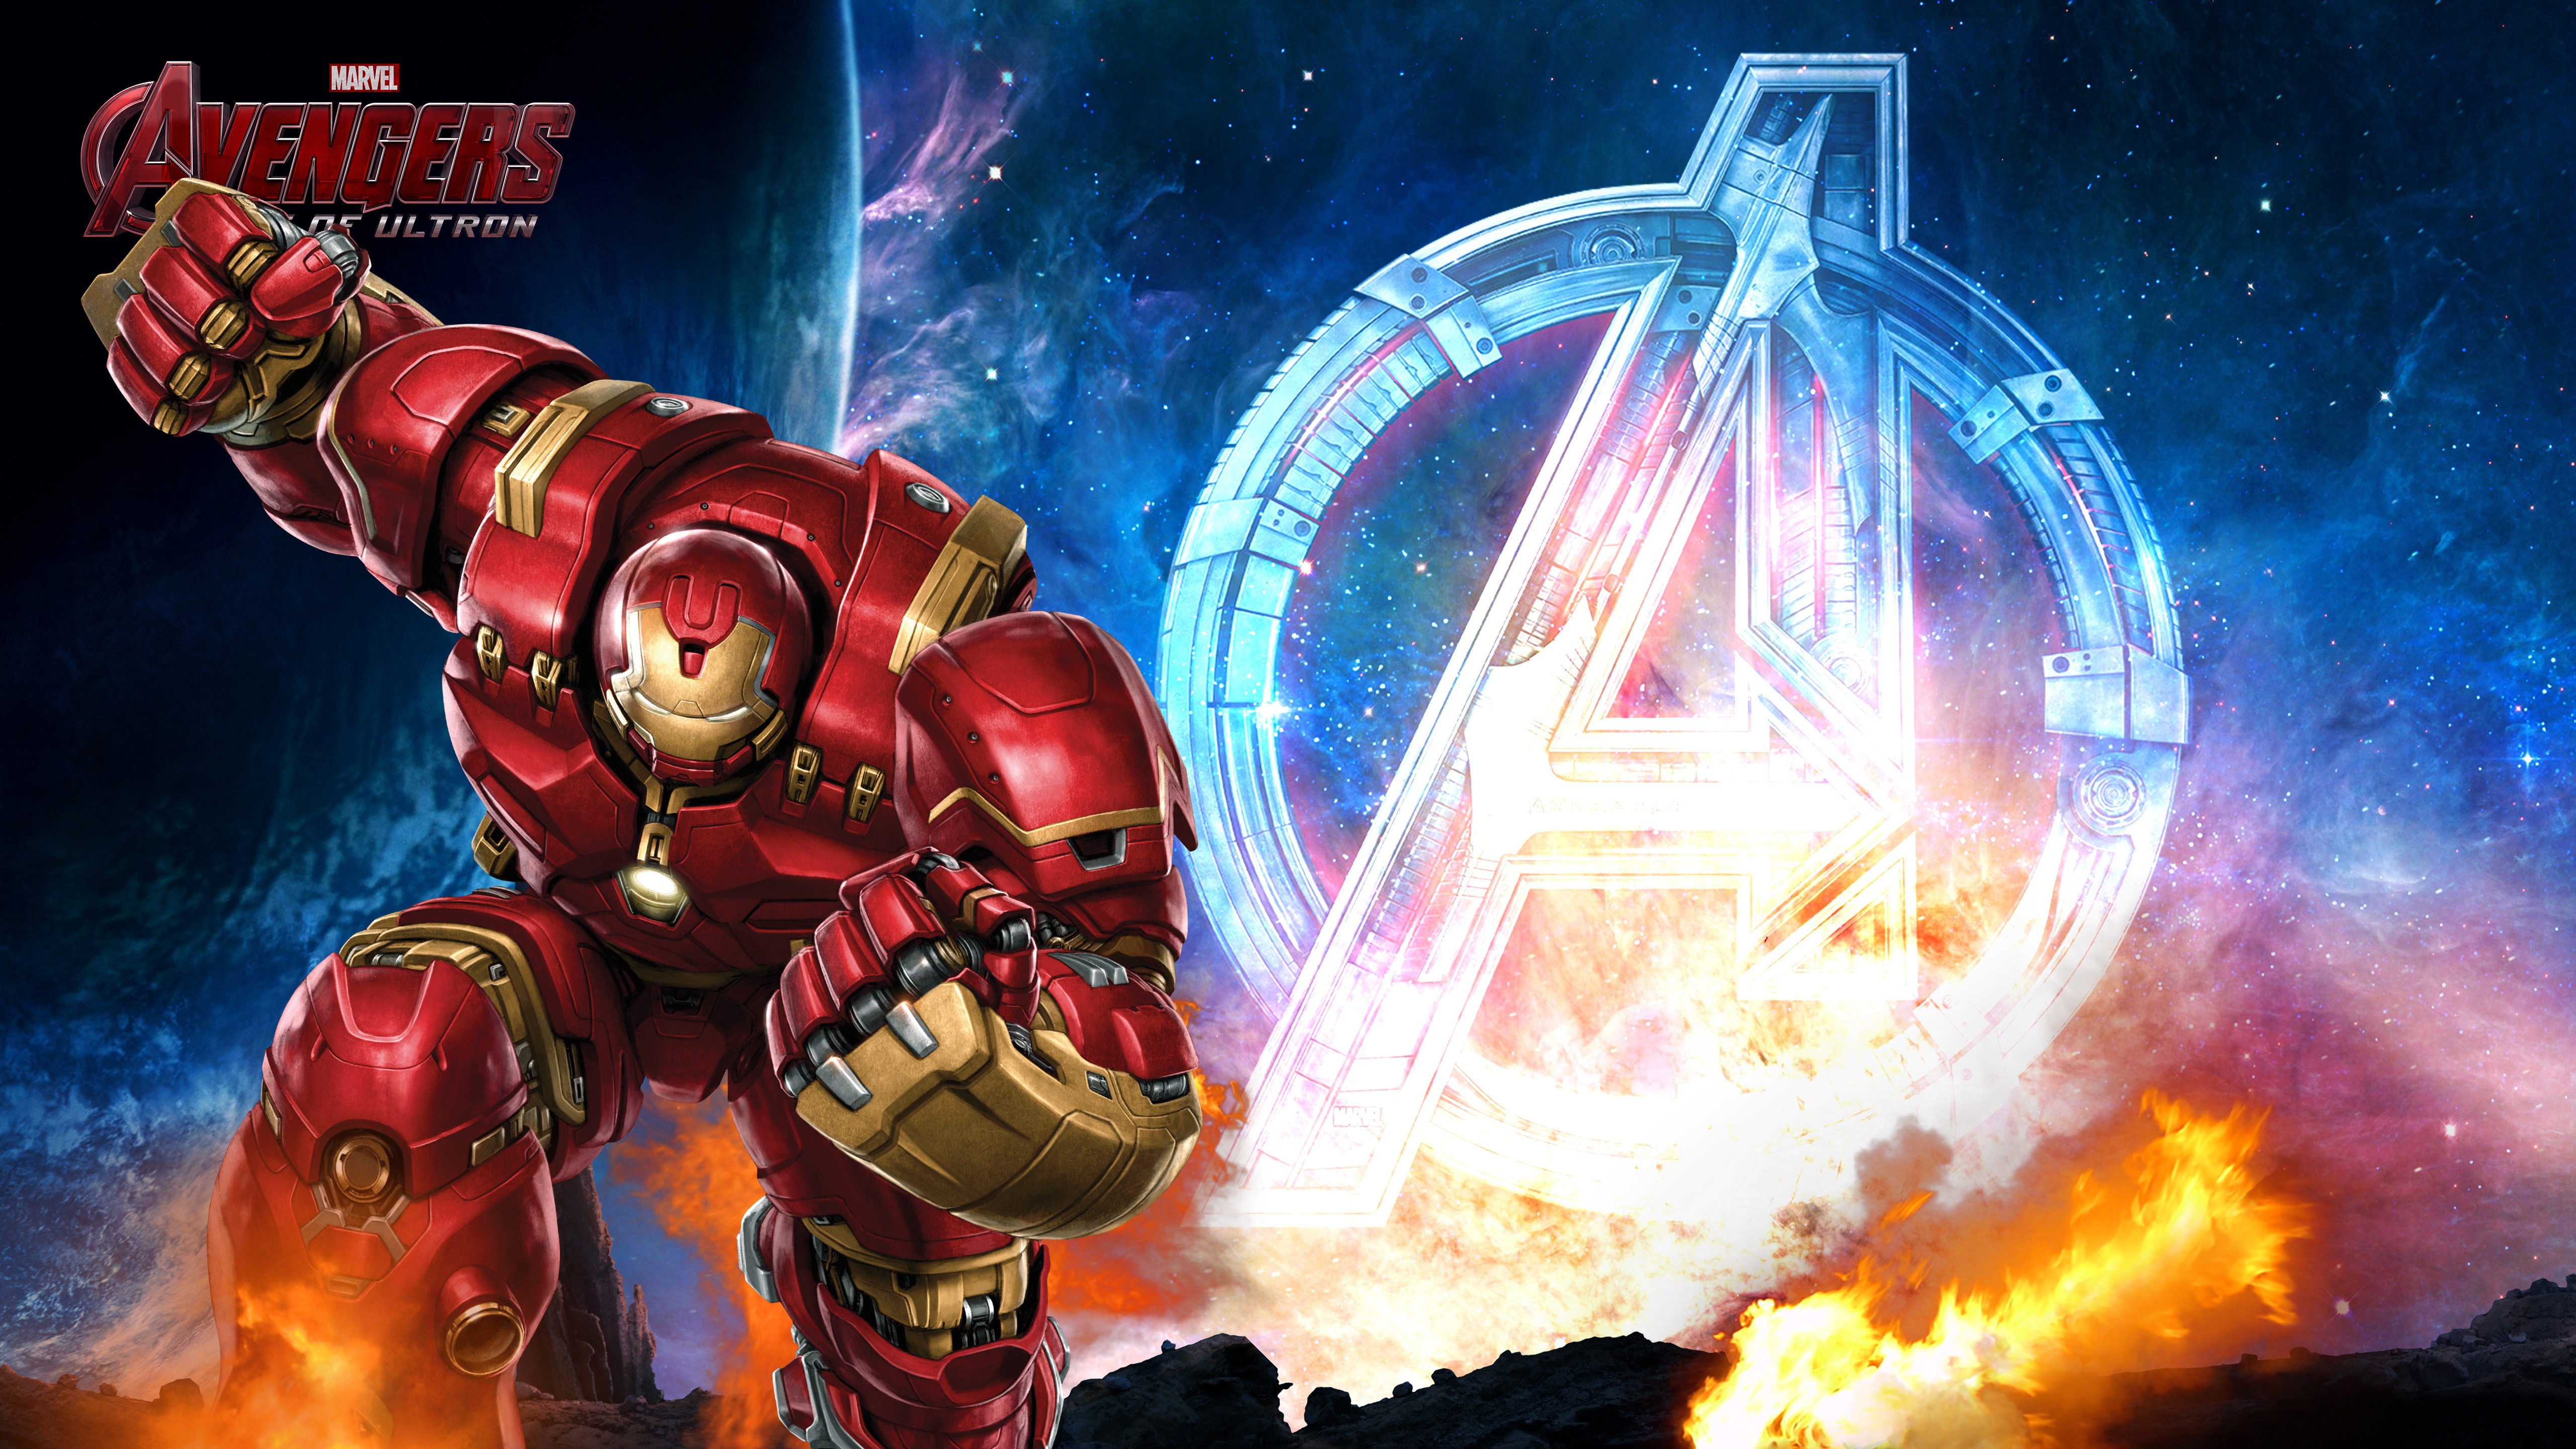 General 5120x2880 Avengers: Age of Ultron Hulkbuster red Marvel Cinematic Universe movies digital art